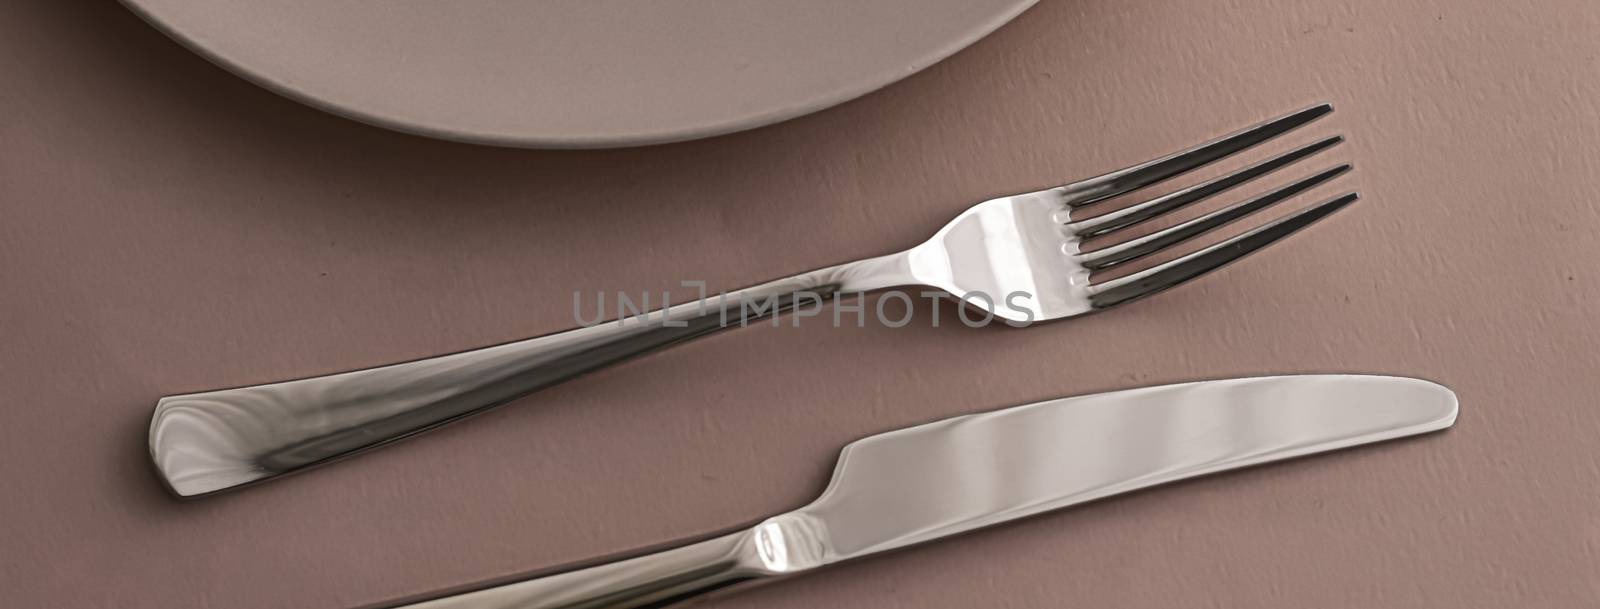 Empty plate and cutlery as mockup set on brown background, top tableware for chef table decor and menu branding design